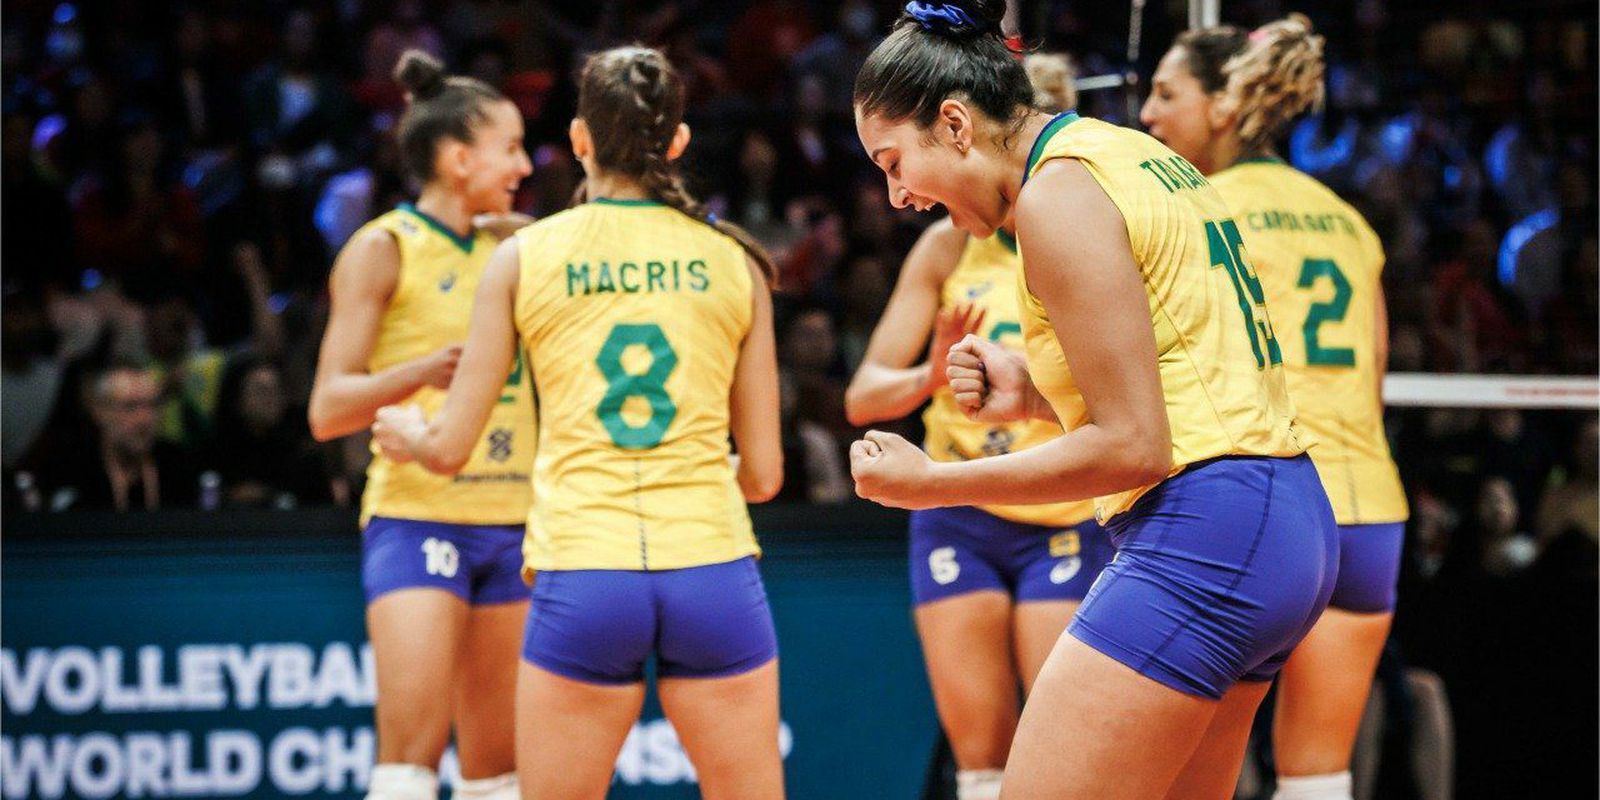 Women's volleyball: Brazil turns over China and wins again at the World Cup